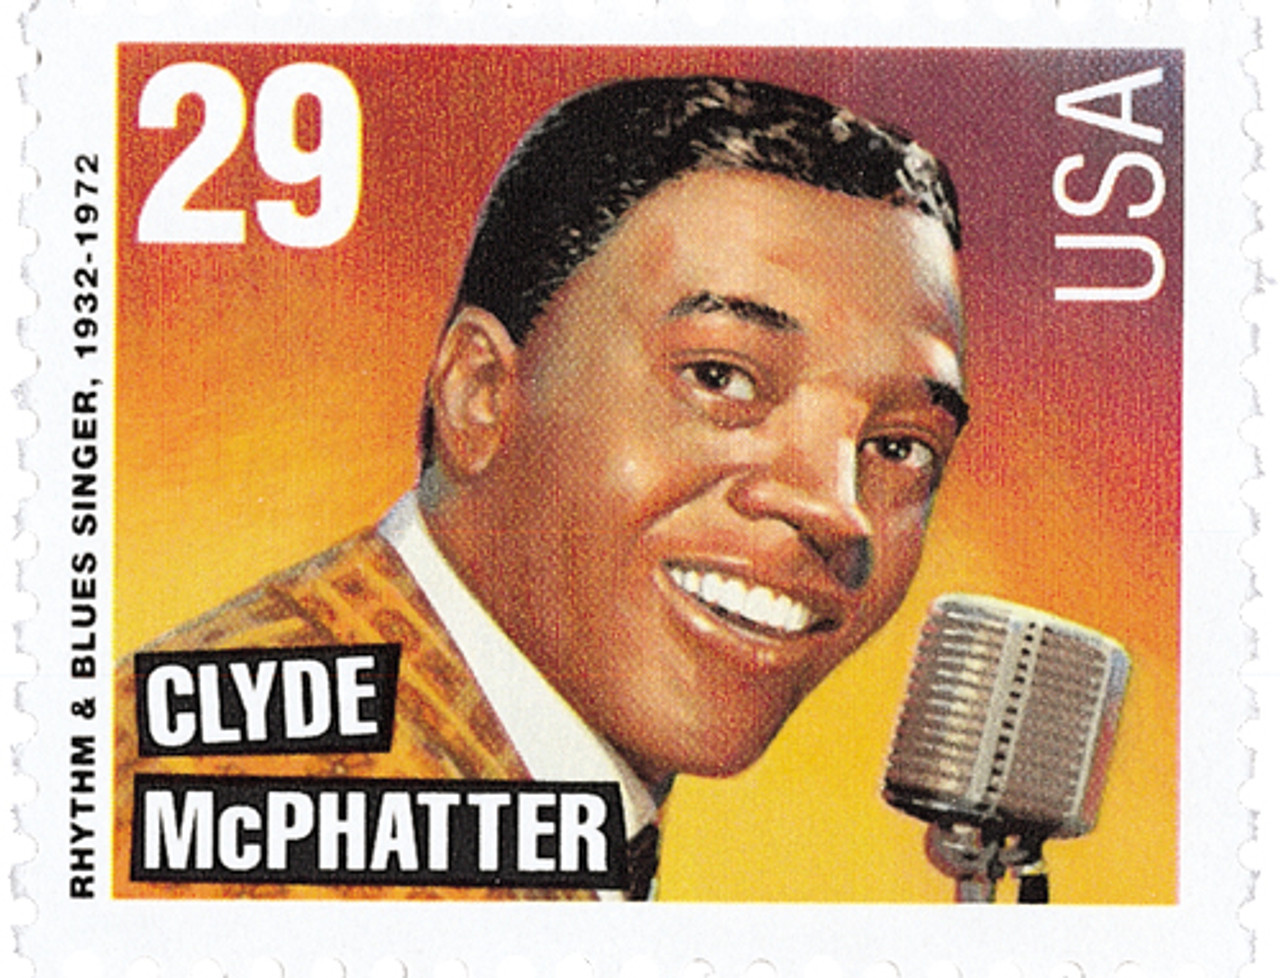 2726 - 1993 29c Legends of American Music: Clyde McPhatter - Mystic Stamp  Company